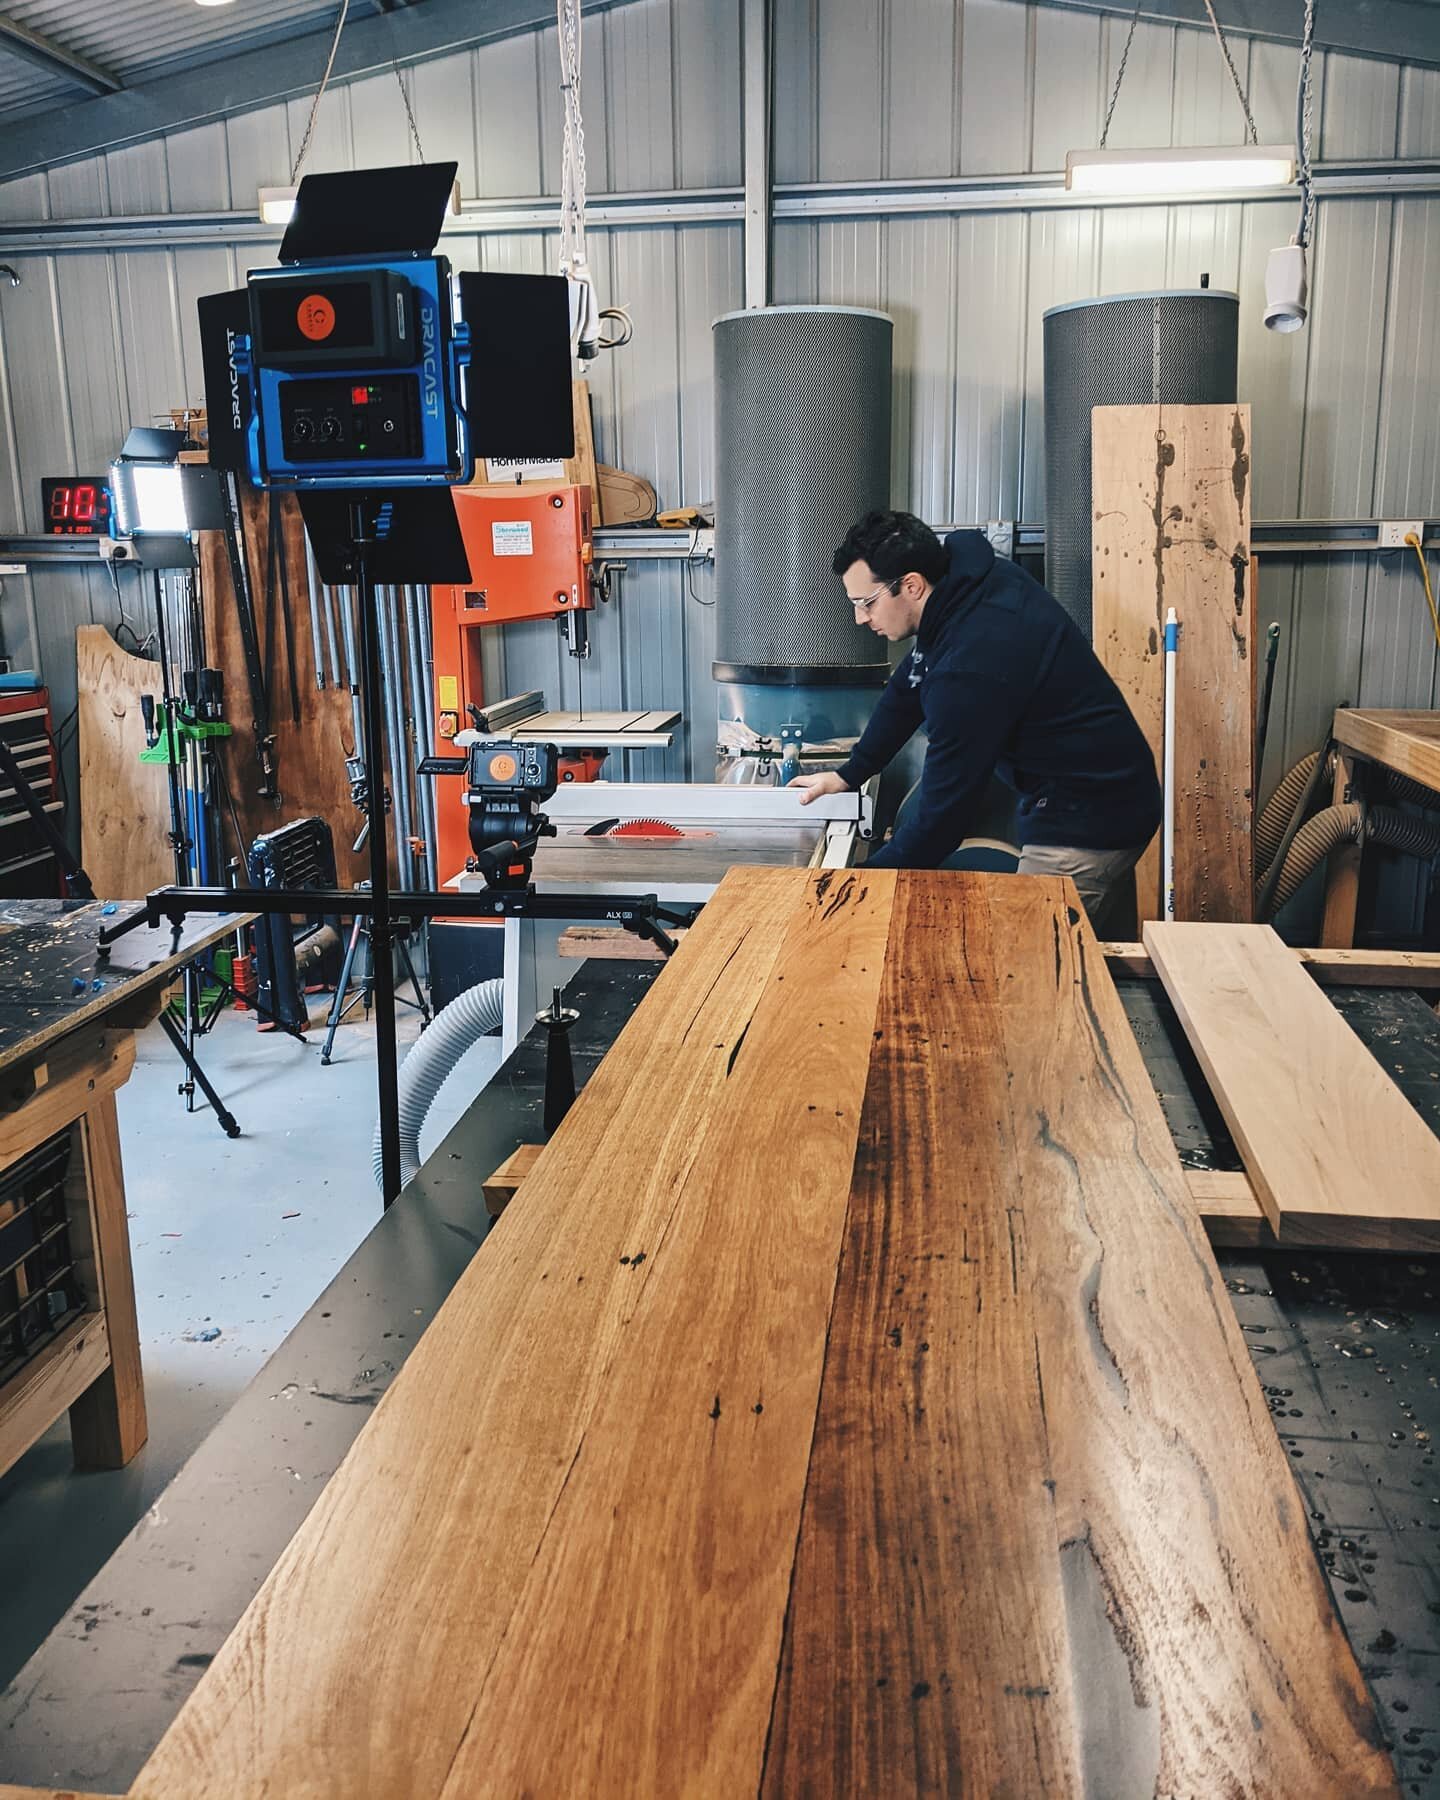 Working on an exciting project with @homermade.woodworking showcasing craftsmanship at its finest. More to come soon!